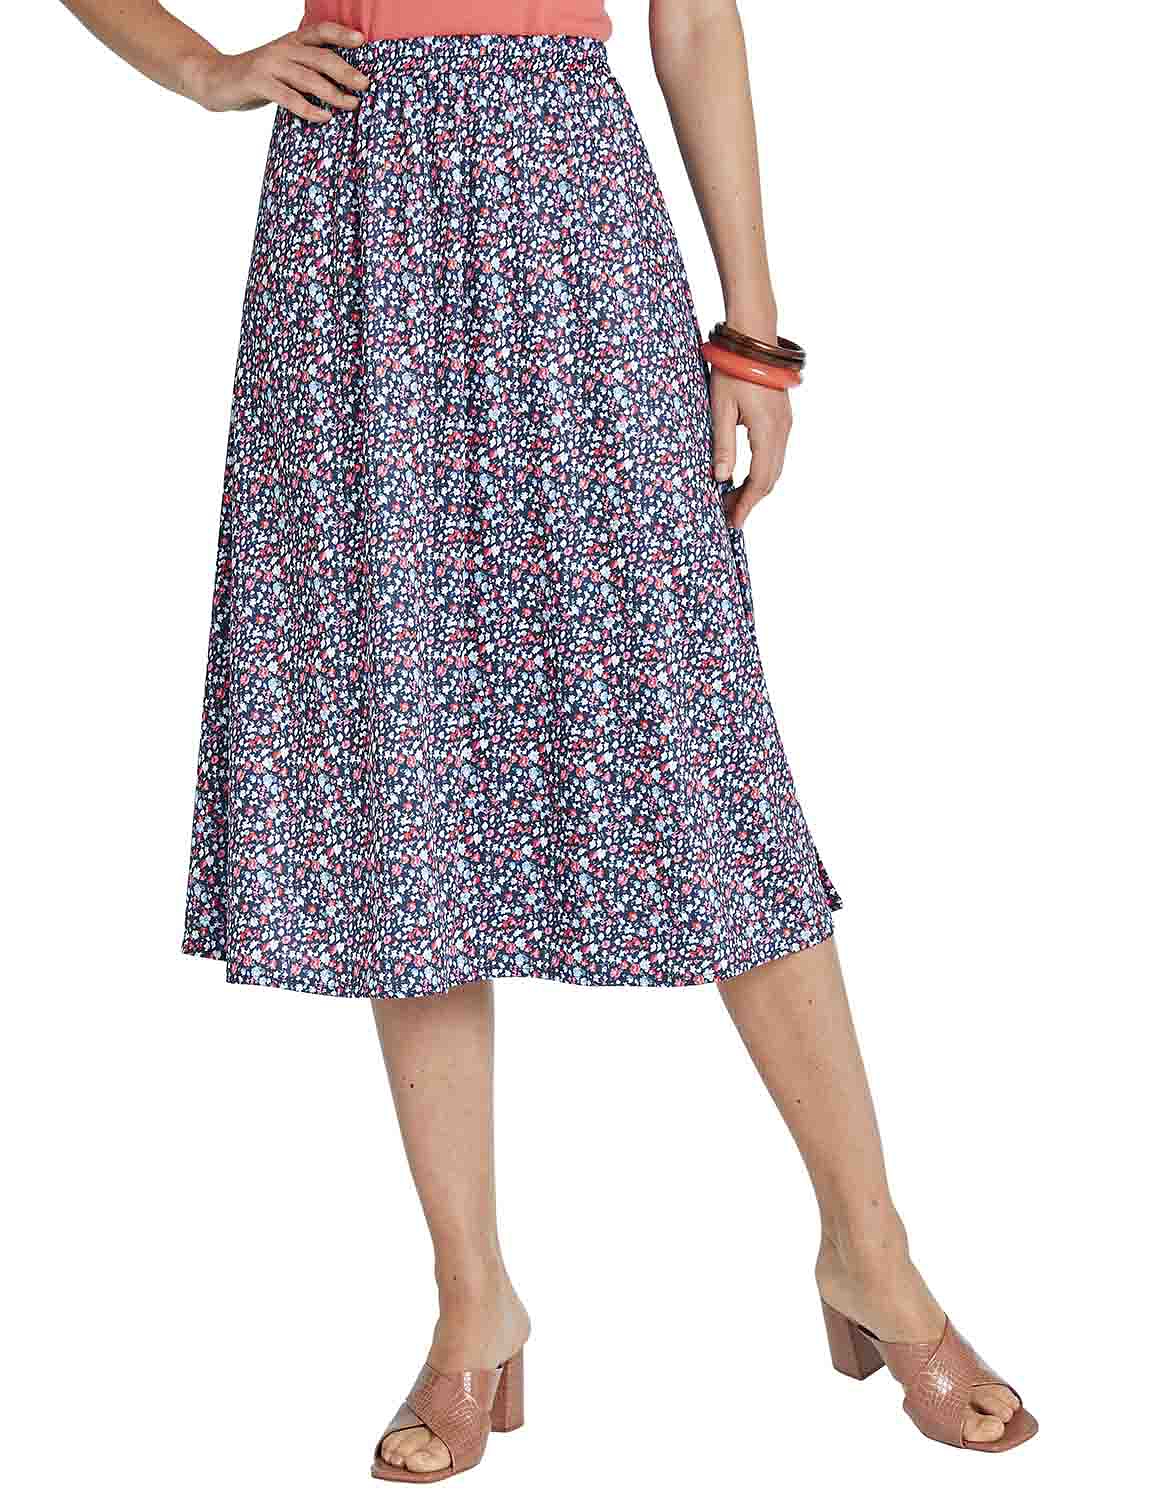 Chums Ladies Womens Plisse Skirt Length 27 Inches 